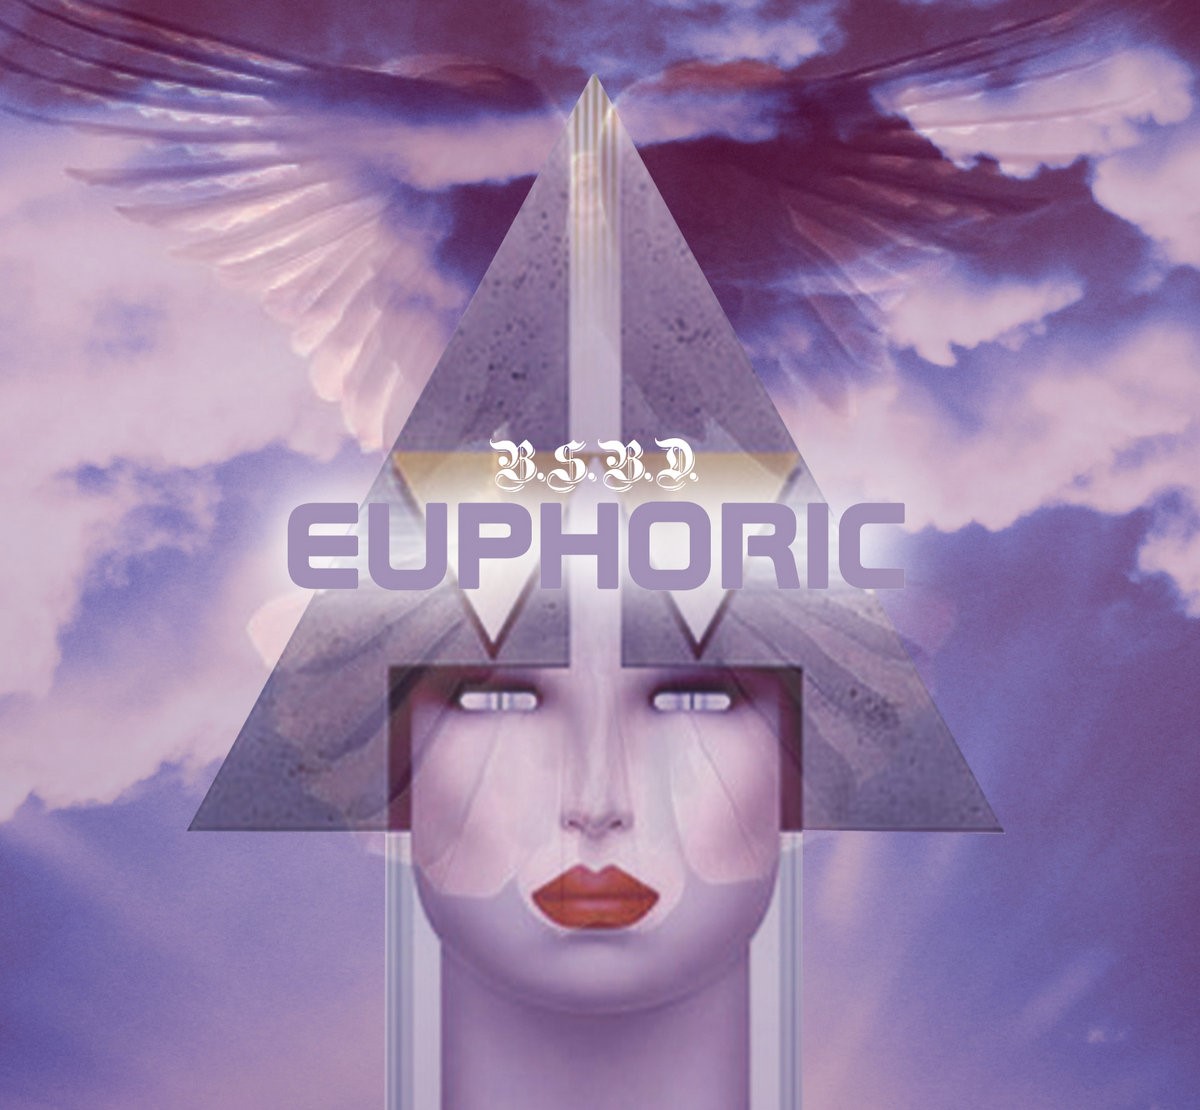 A Large face with empty eyes and a pyramid on their head forming the cover for Euphoric Tape by Blue Sky Black Death.